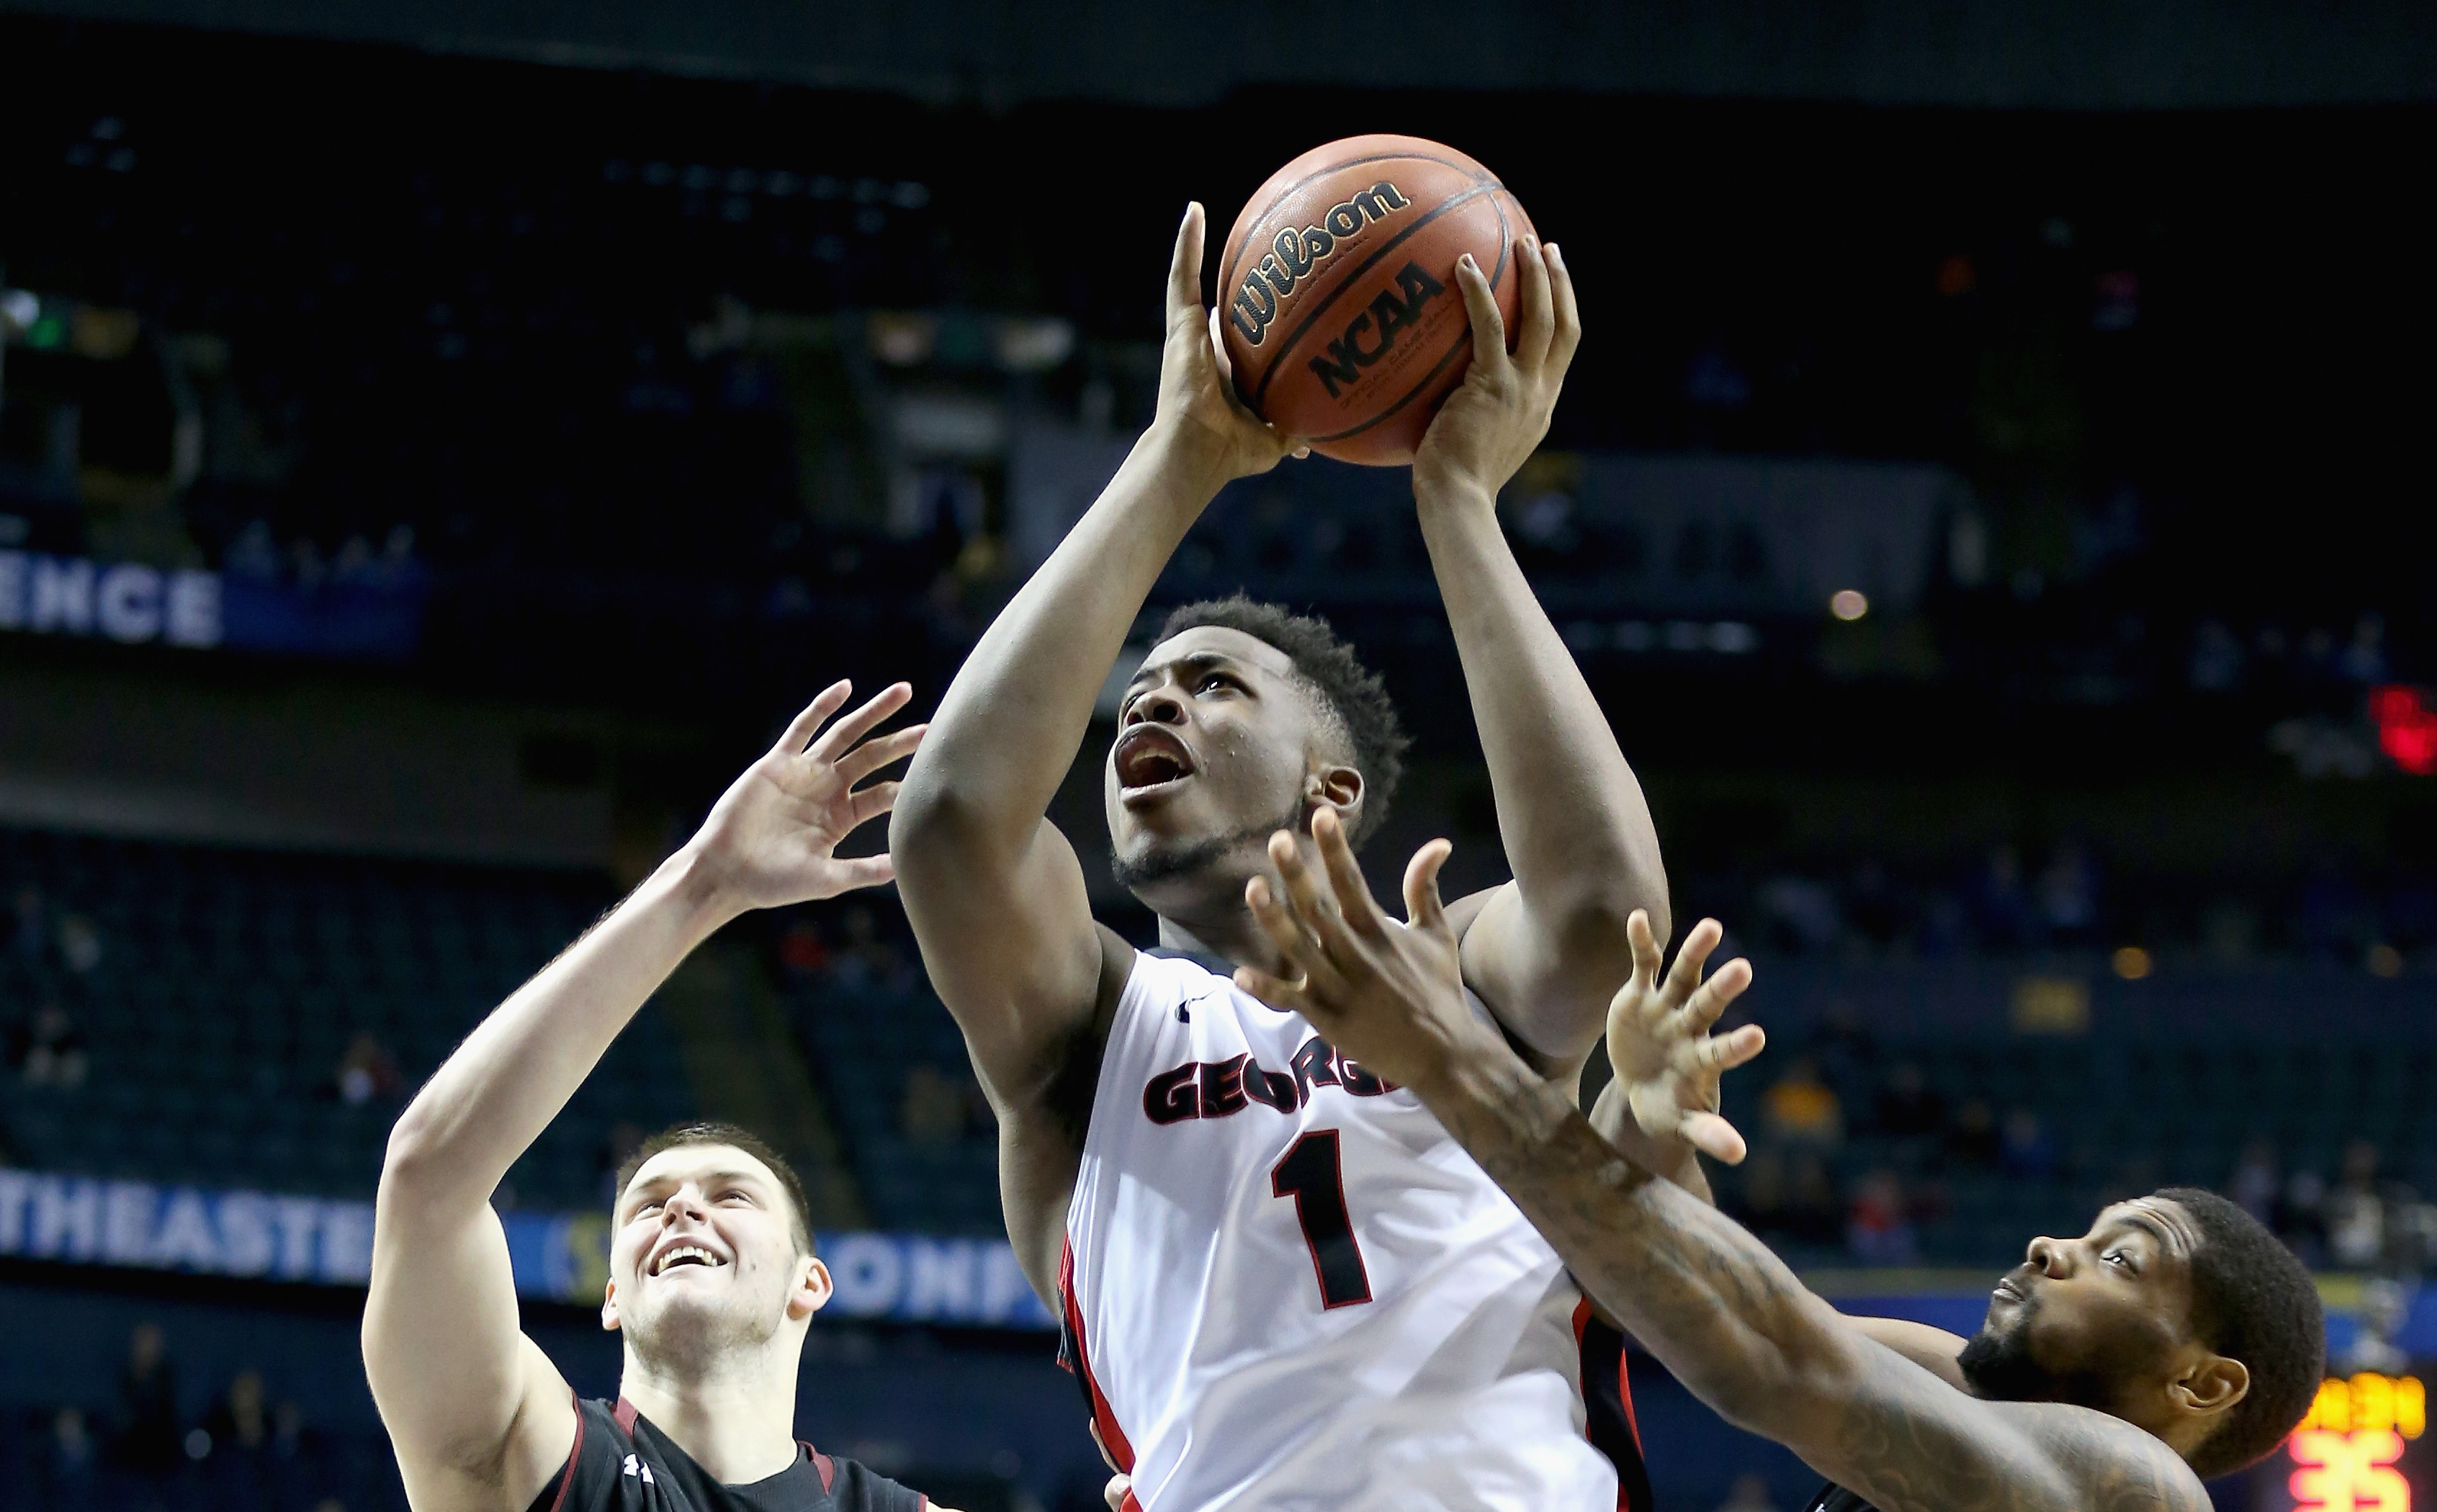 NASHVILLE, TN - MARCH 13: Yante Maten #1 of the Georgia Bulldogs shoots the ball against the South Carolina Gamecocks during the quarterfinals of the SEC Basketball Tournament at Bridgestone Arena on March 13, 2015 in Nashville, Tennessee. (Photo by Andy Lyons/Getty Images)